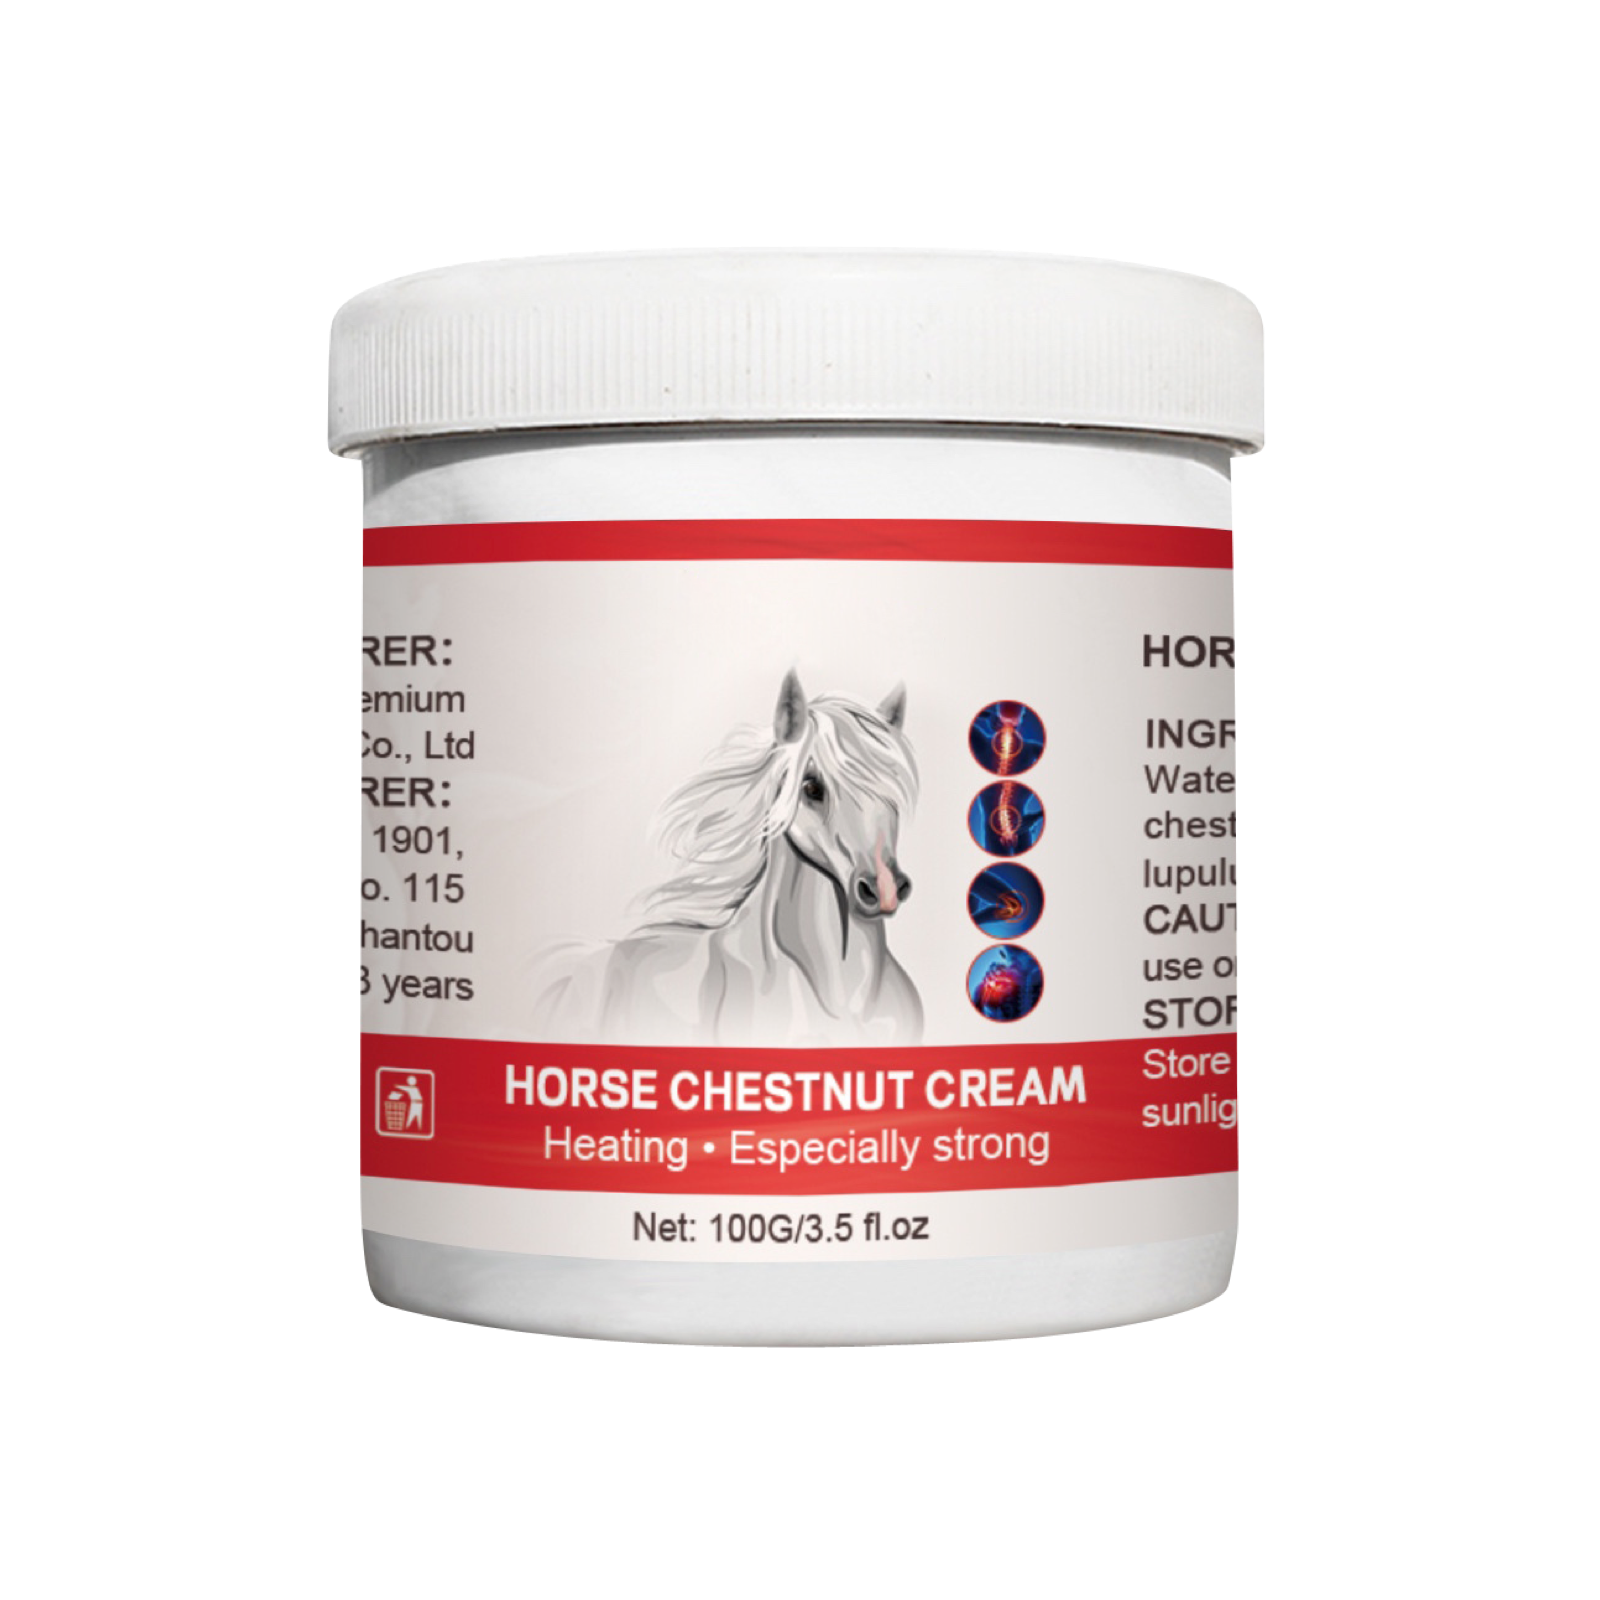 Horse Chestnut Cream - Limited Time Special Offer!